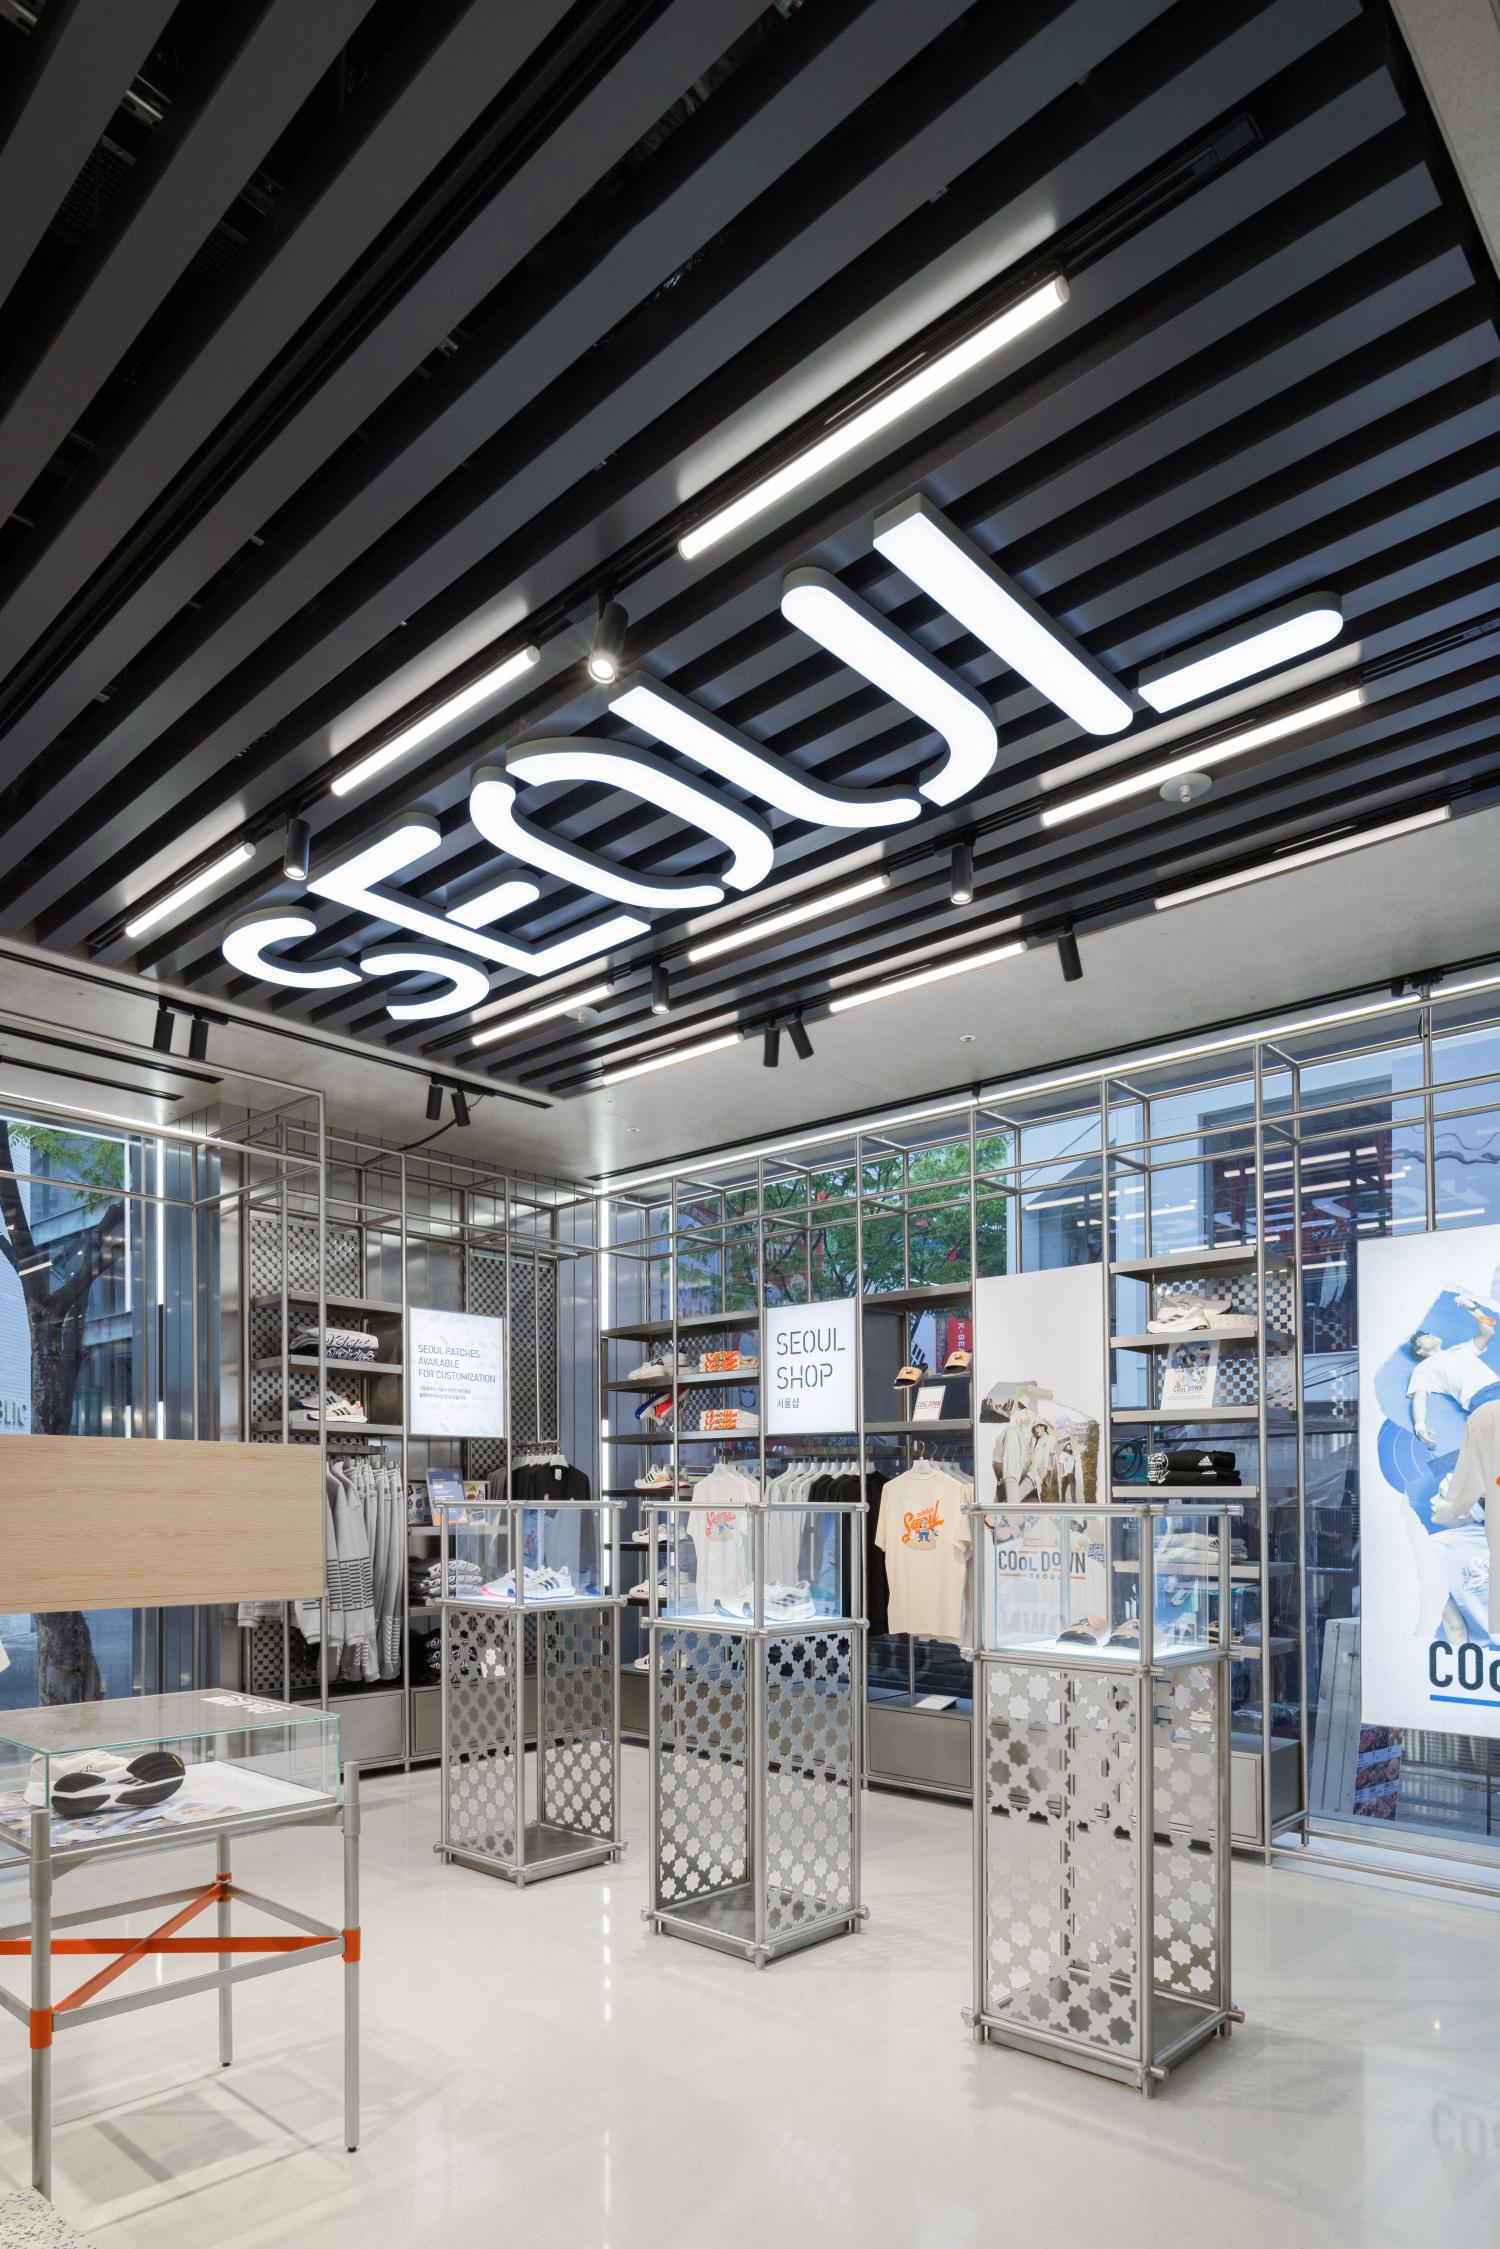 Made in Milan: Off-White opens London store - Inside Retail Asia